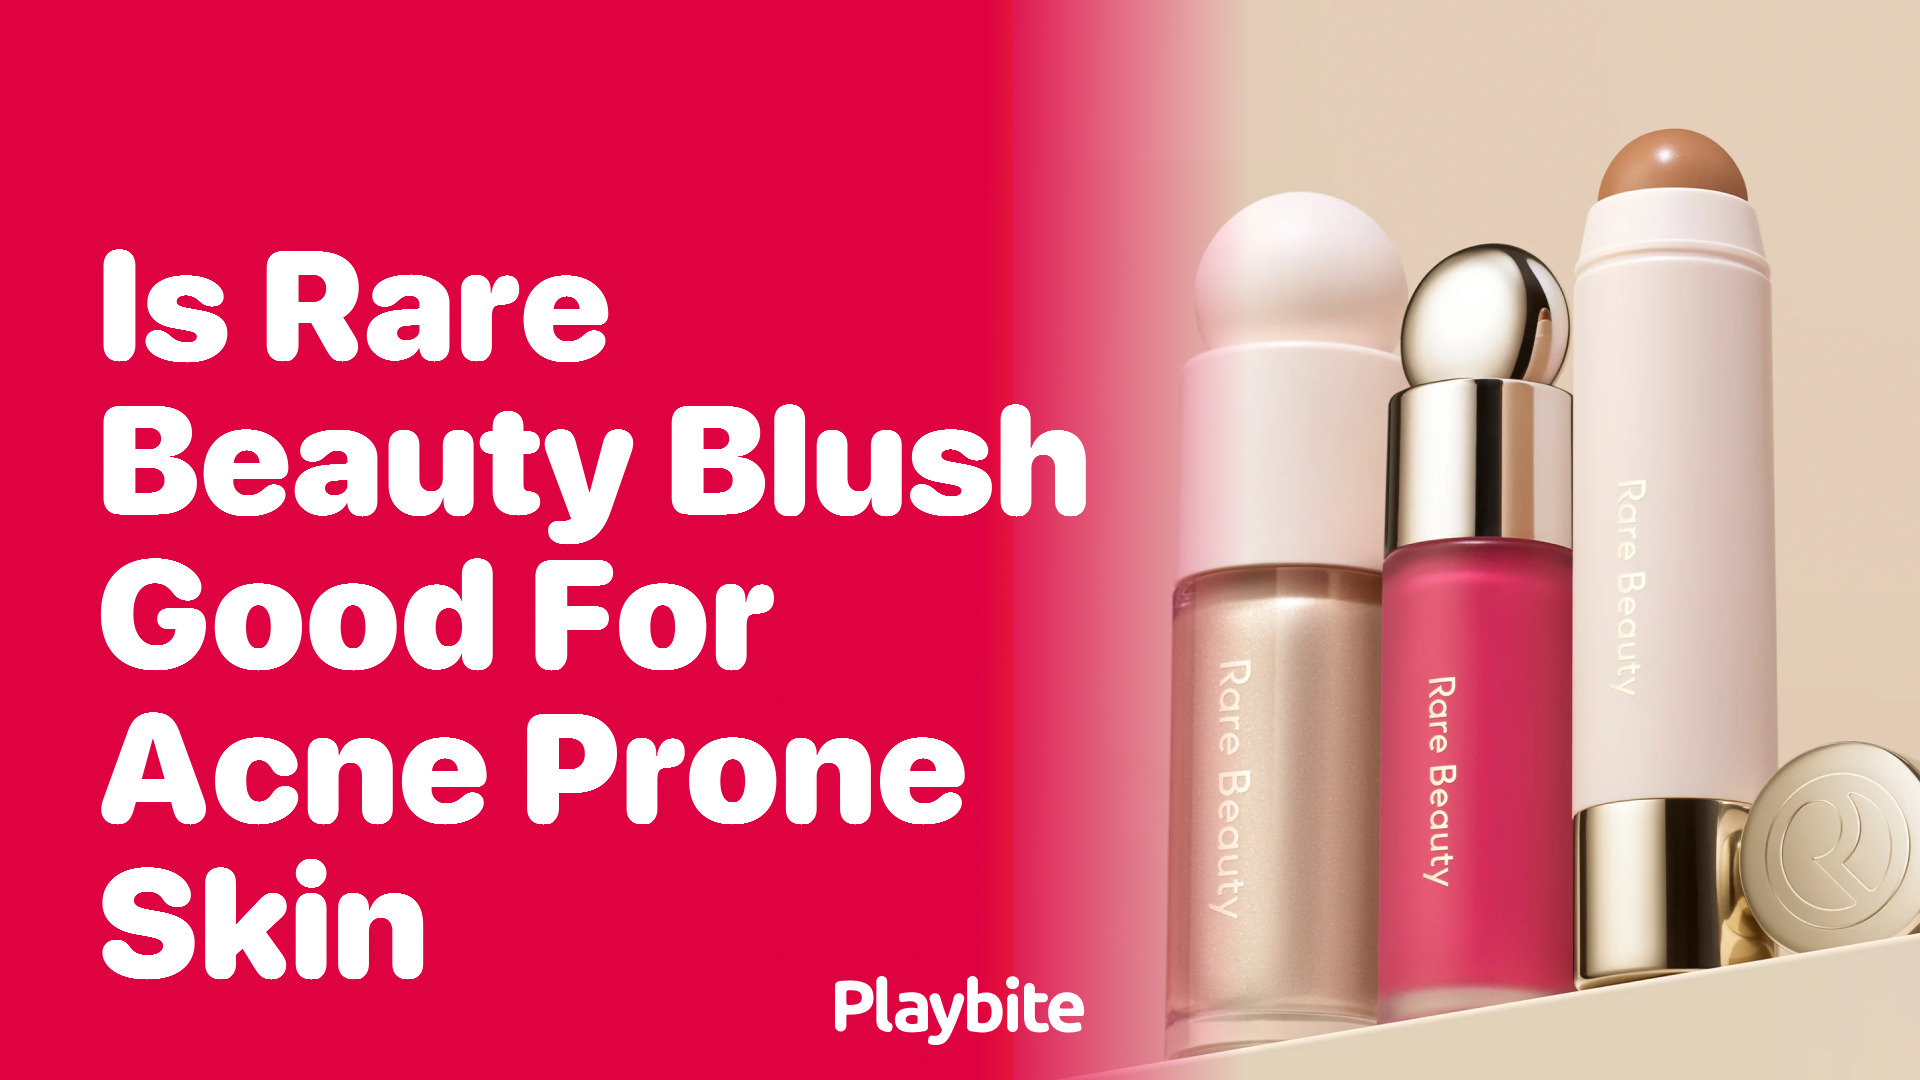 Is Rare Beauty Blush Good for Acne-Prone Skin? An Insightful Look